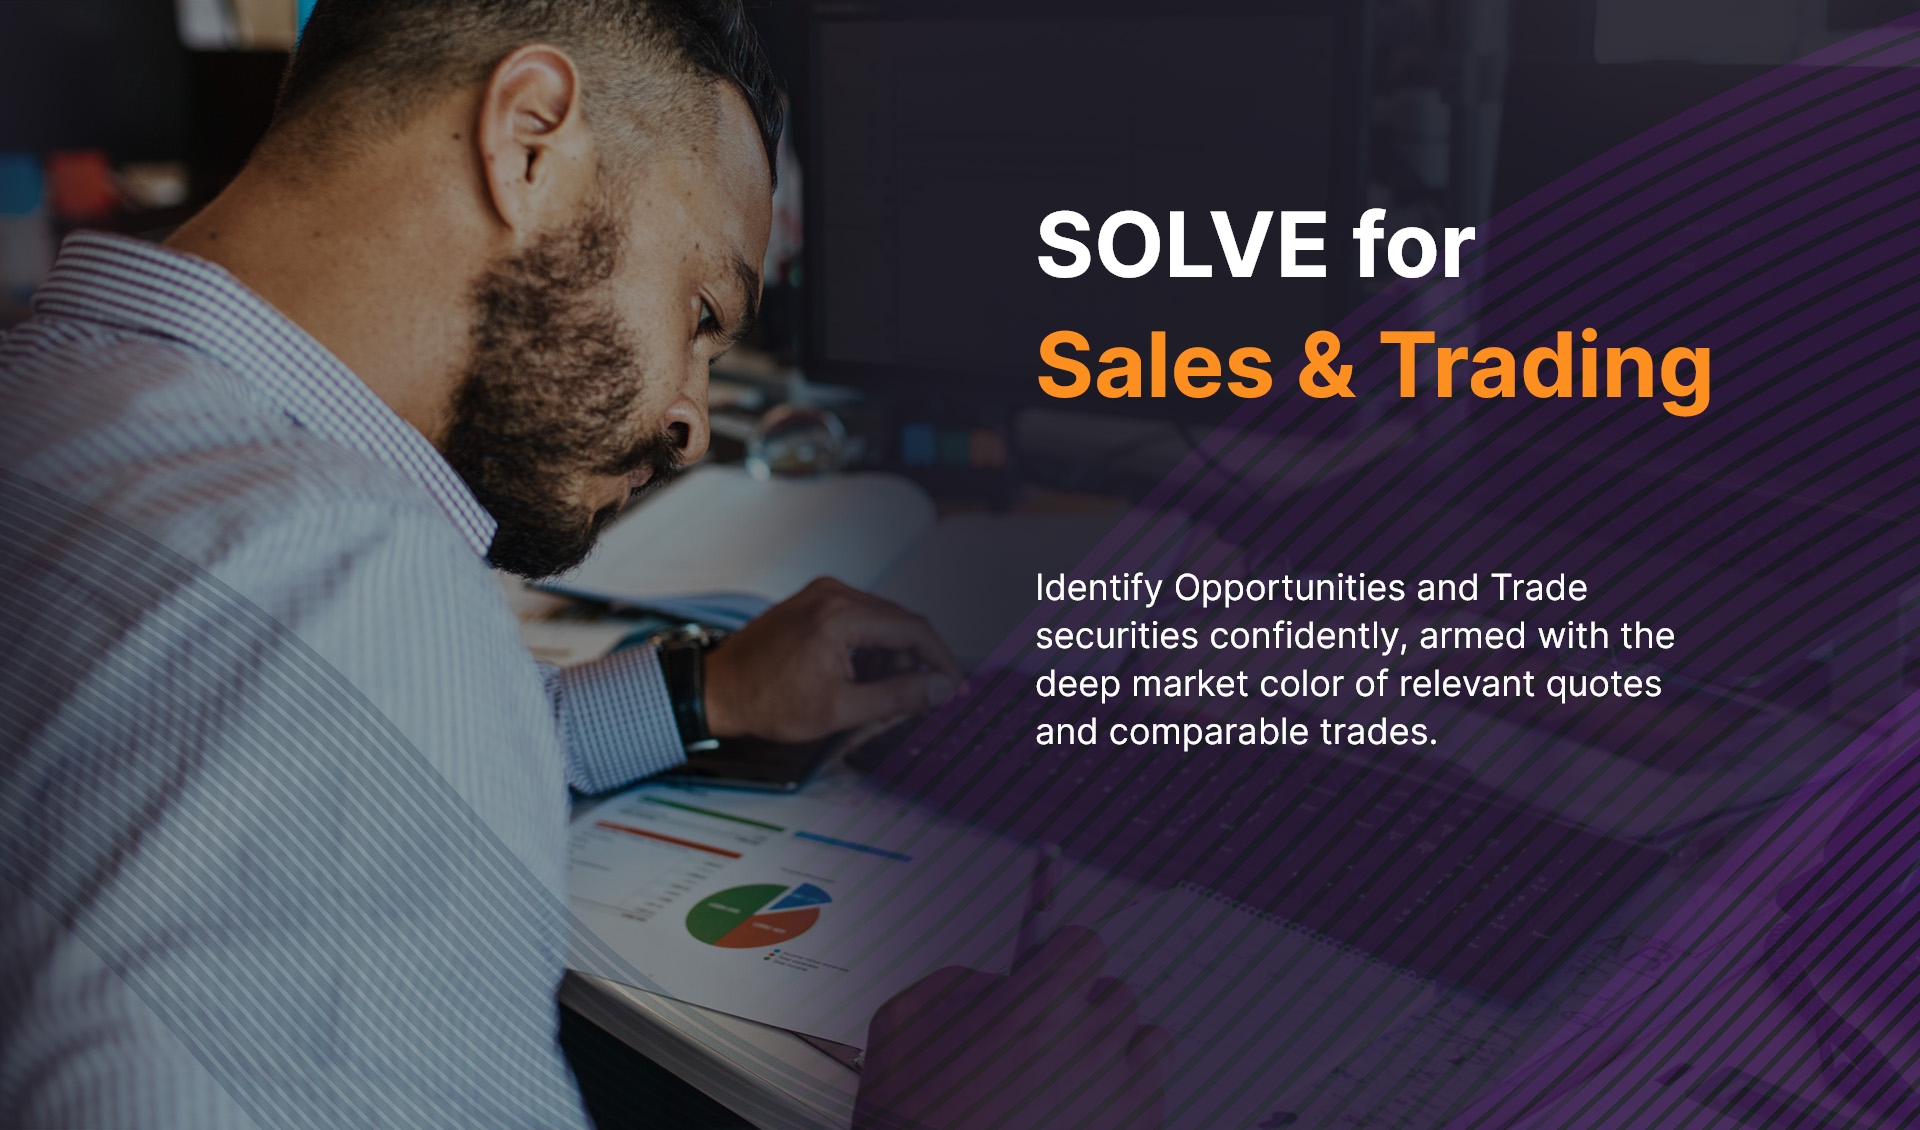 SOLVE for Sales & Trading